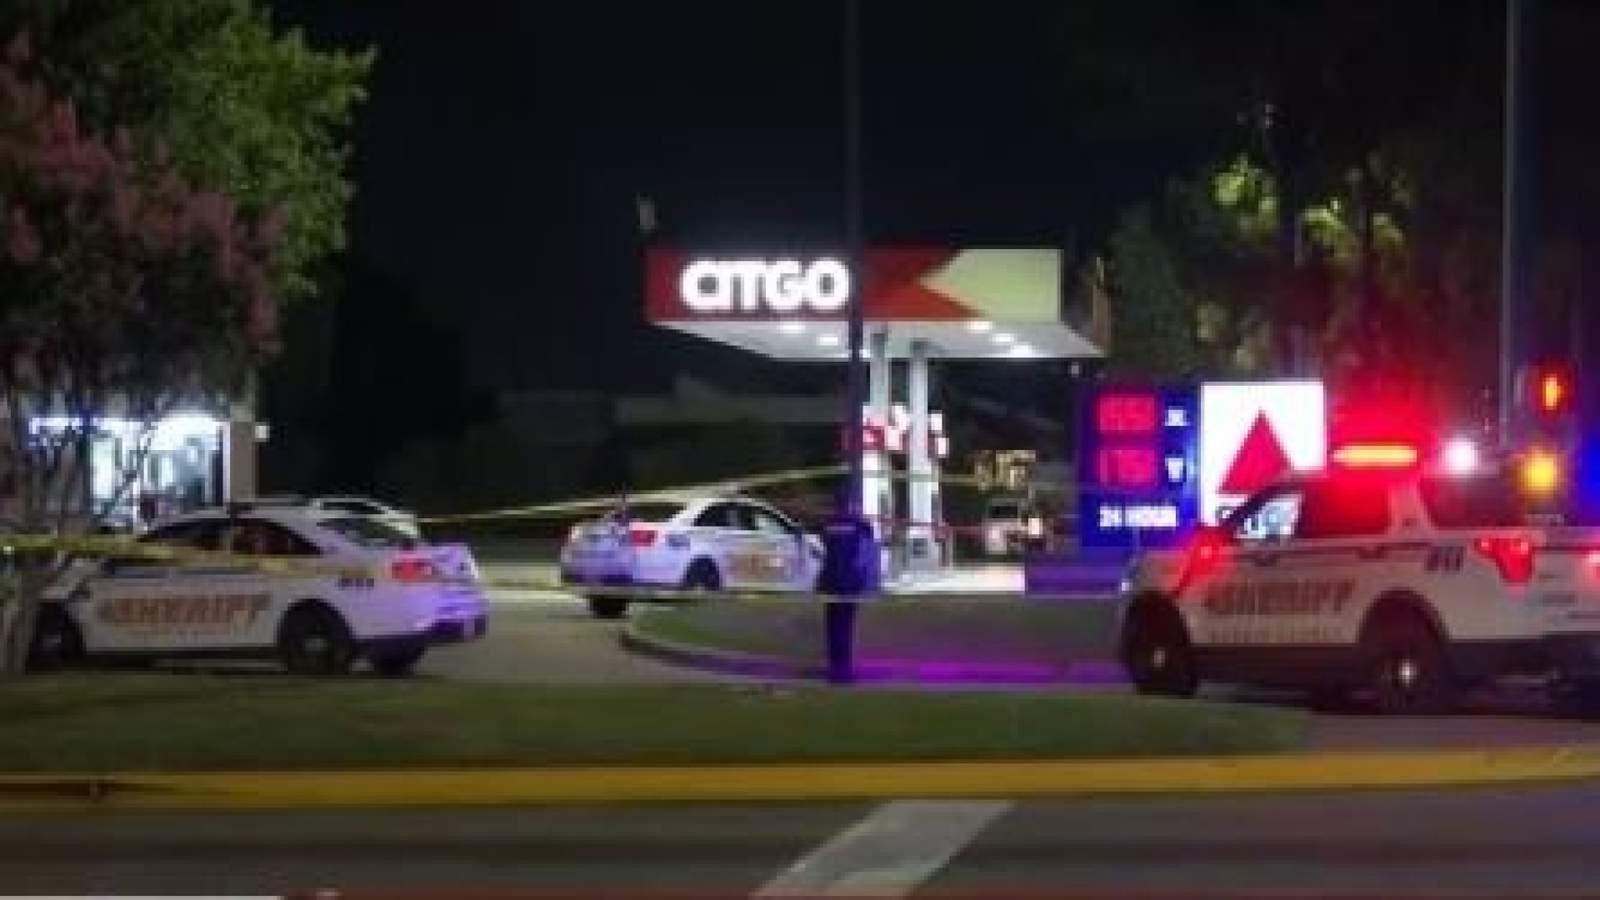 Man shot, killed during meet-up at gas station in NW Harris County: HCSO